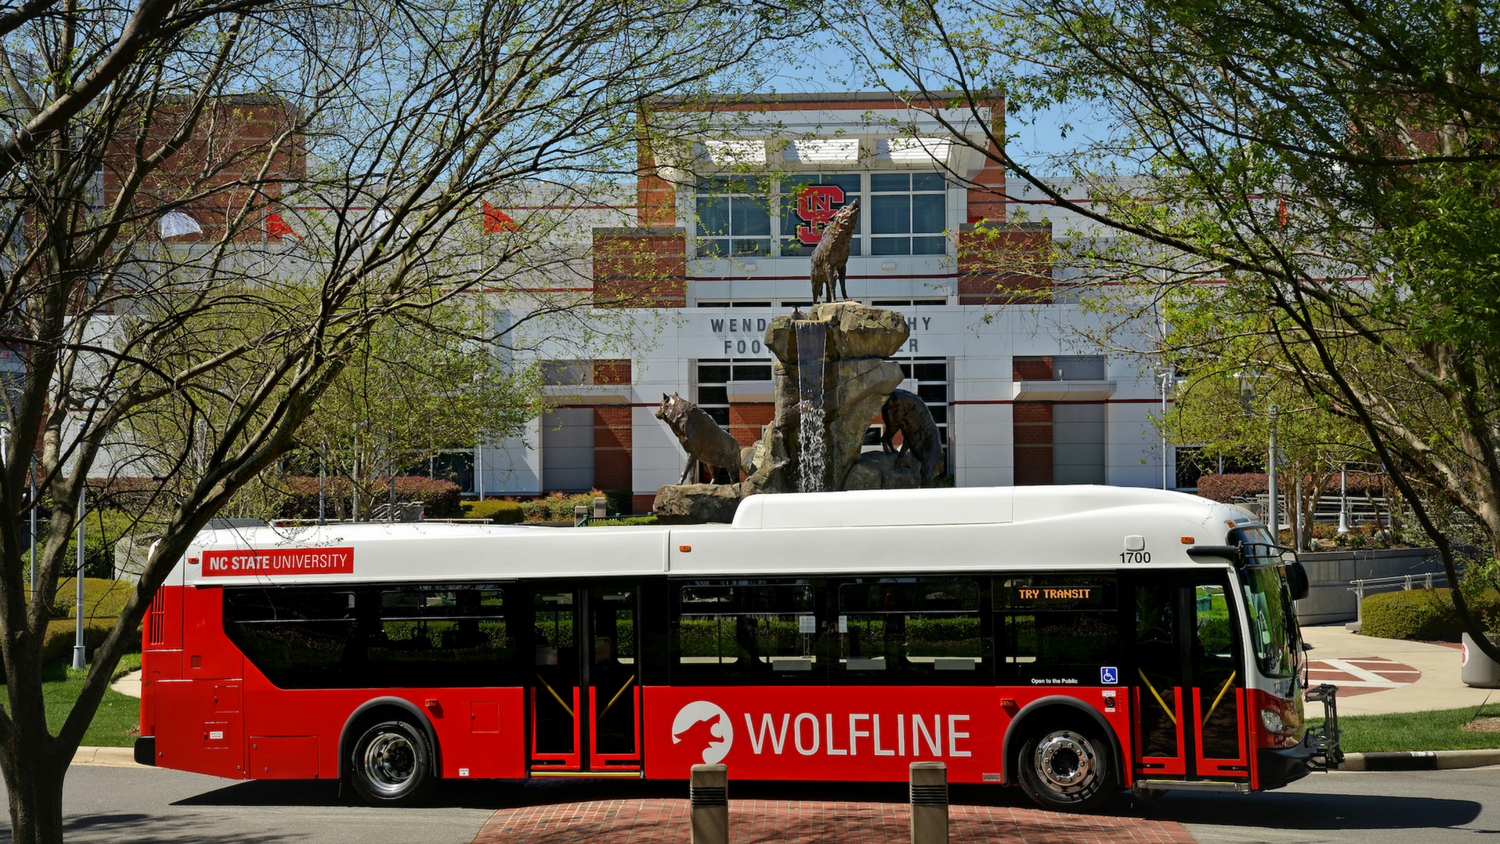 Wolfline bus with Wendell H. Murphy Football Center in background